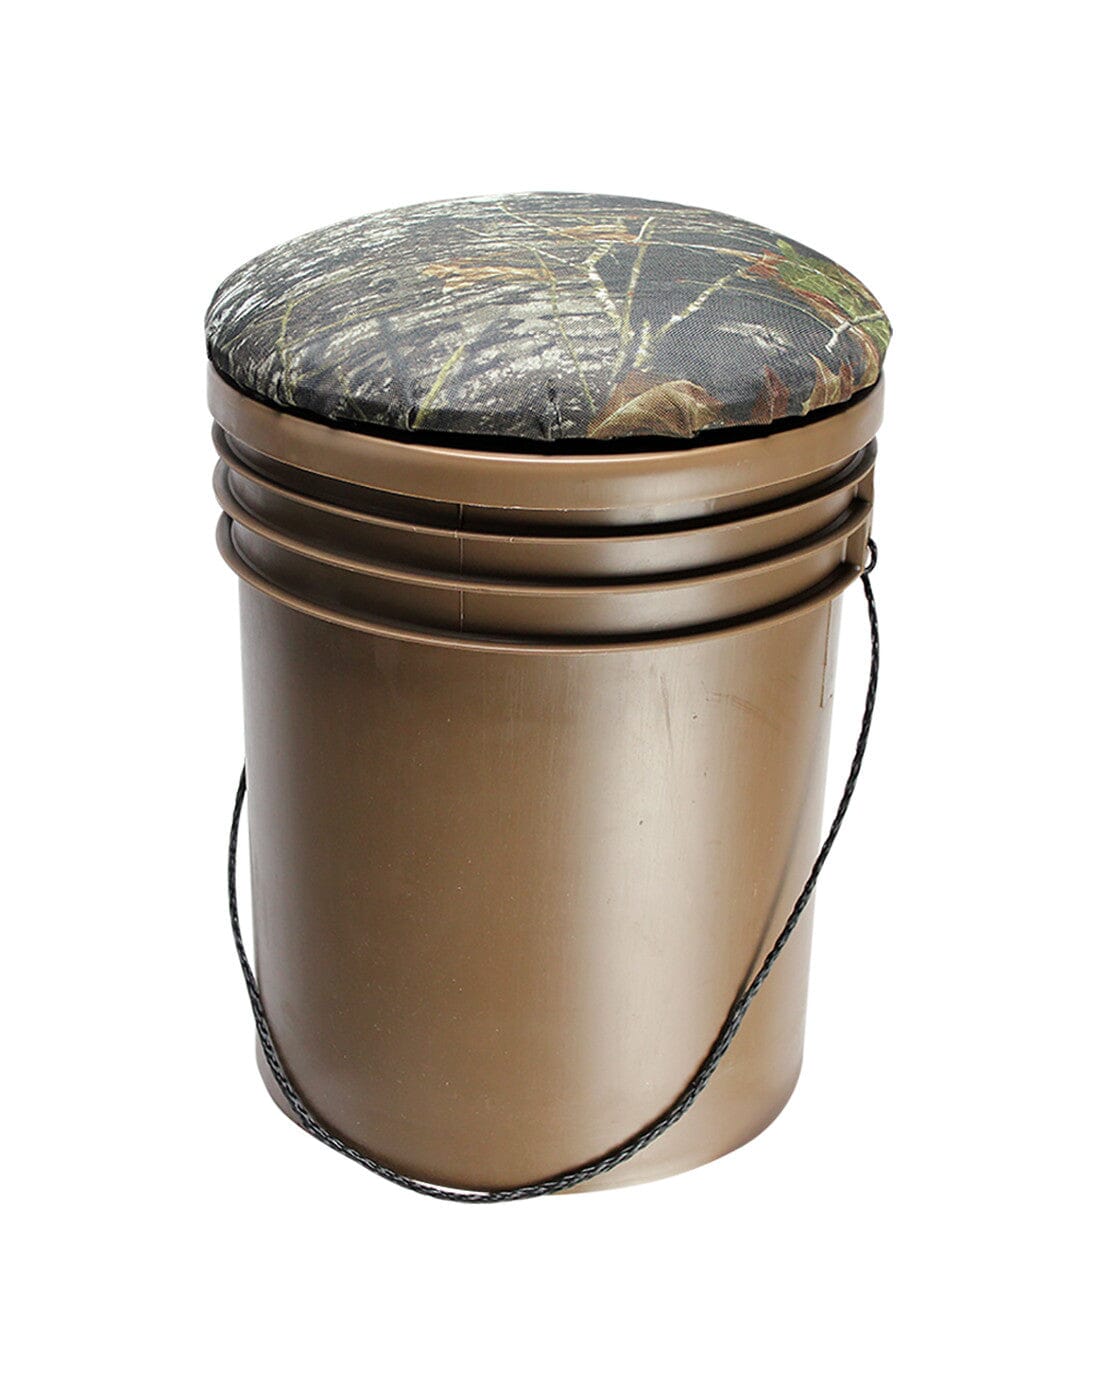 Wise Outdoors - 5615 - Dove Bucket w/ Stealth Seat – Boatseats